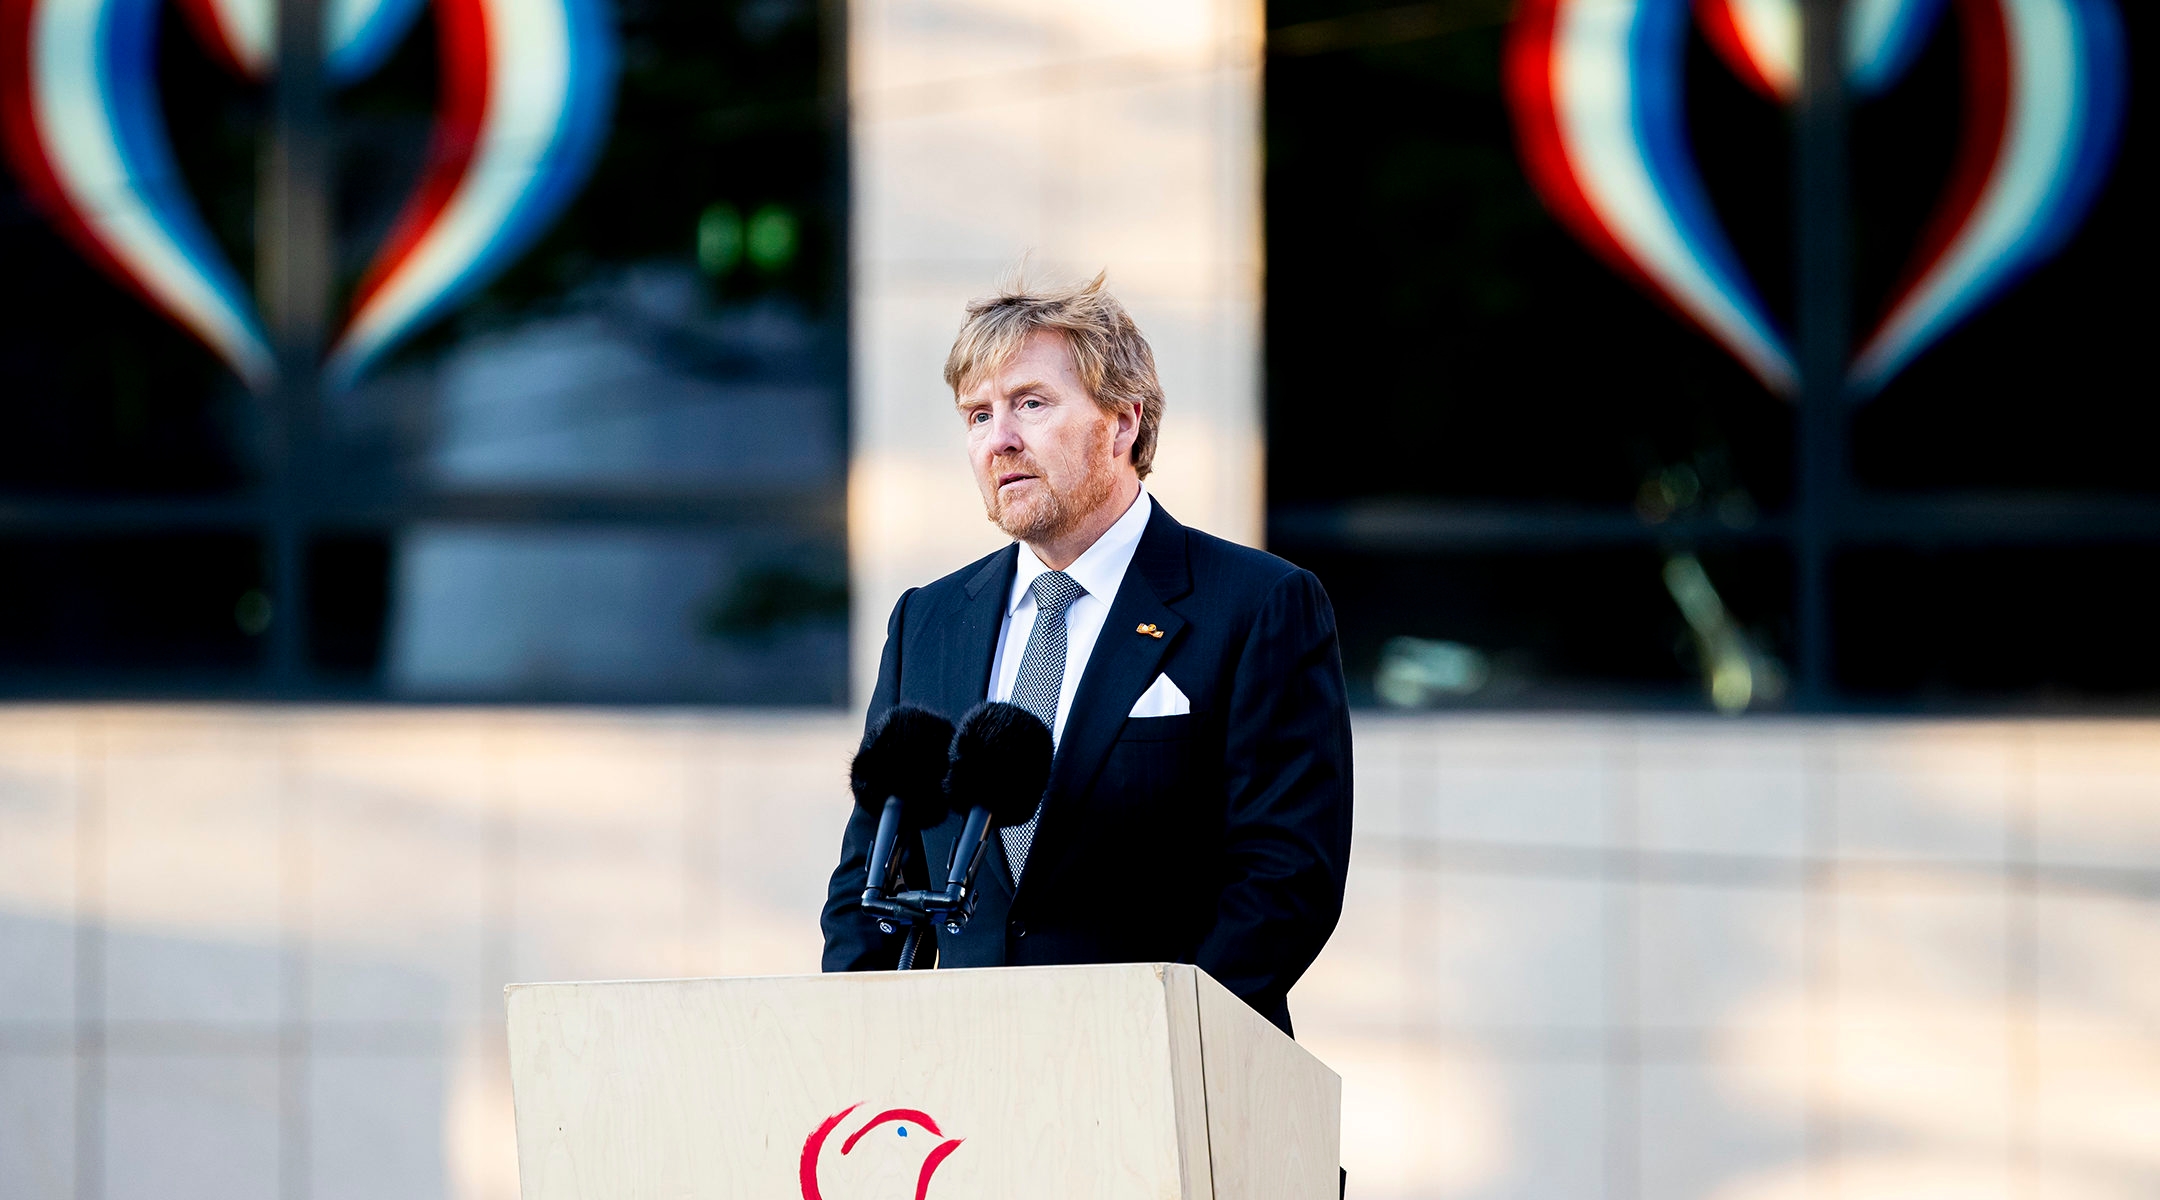 King Willem-Alexander of The Netherlands delivering a speech during the National Remembrance Day ceremony on May 4, 2020 in Amsterdam, Netherlands. (Patrick van Katwijk/BSR Agency/Getty Images)